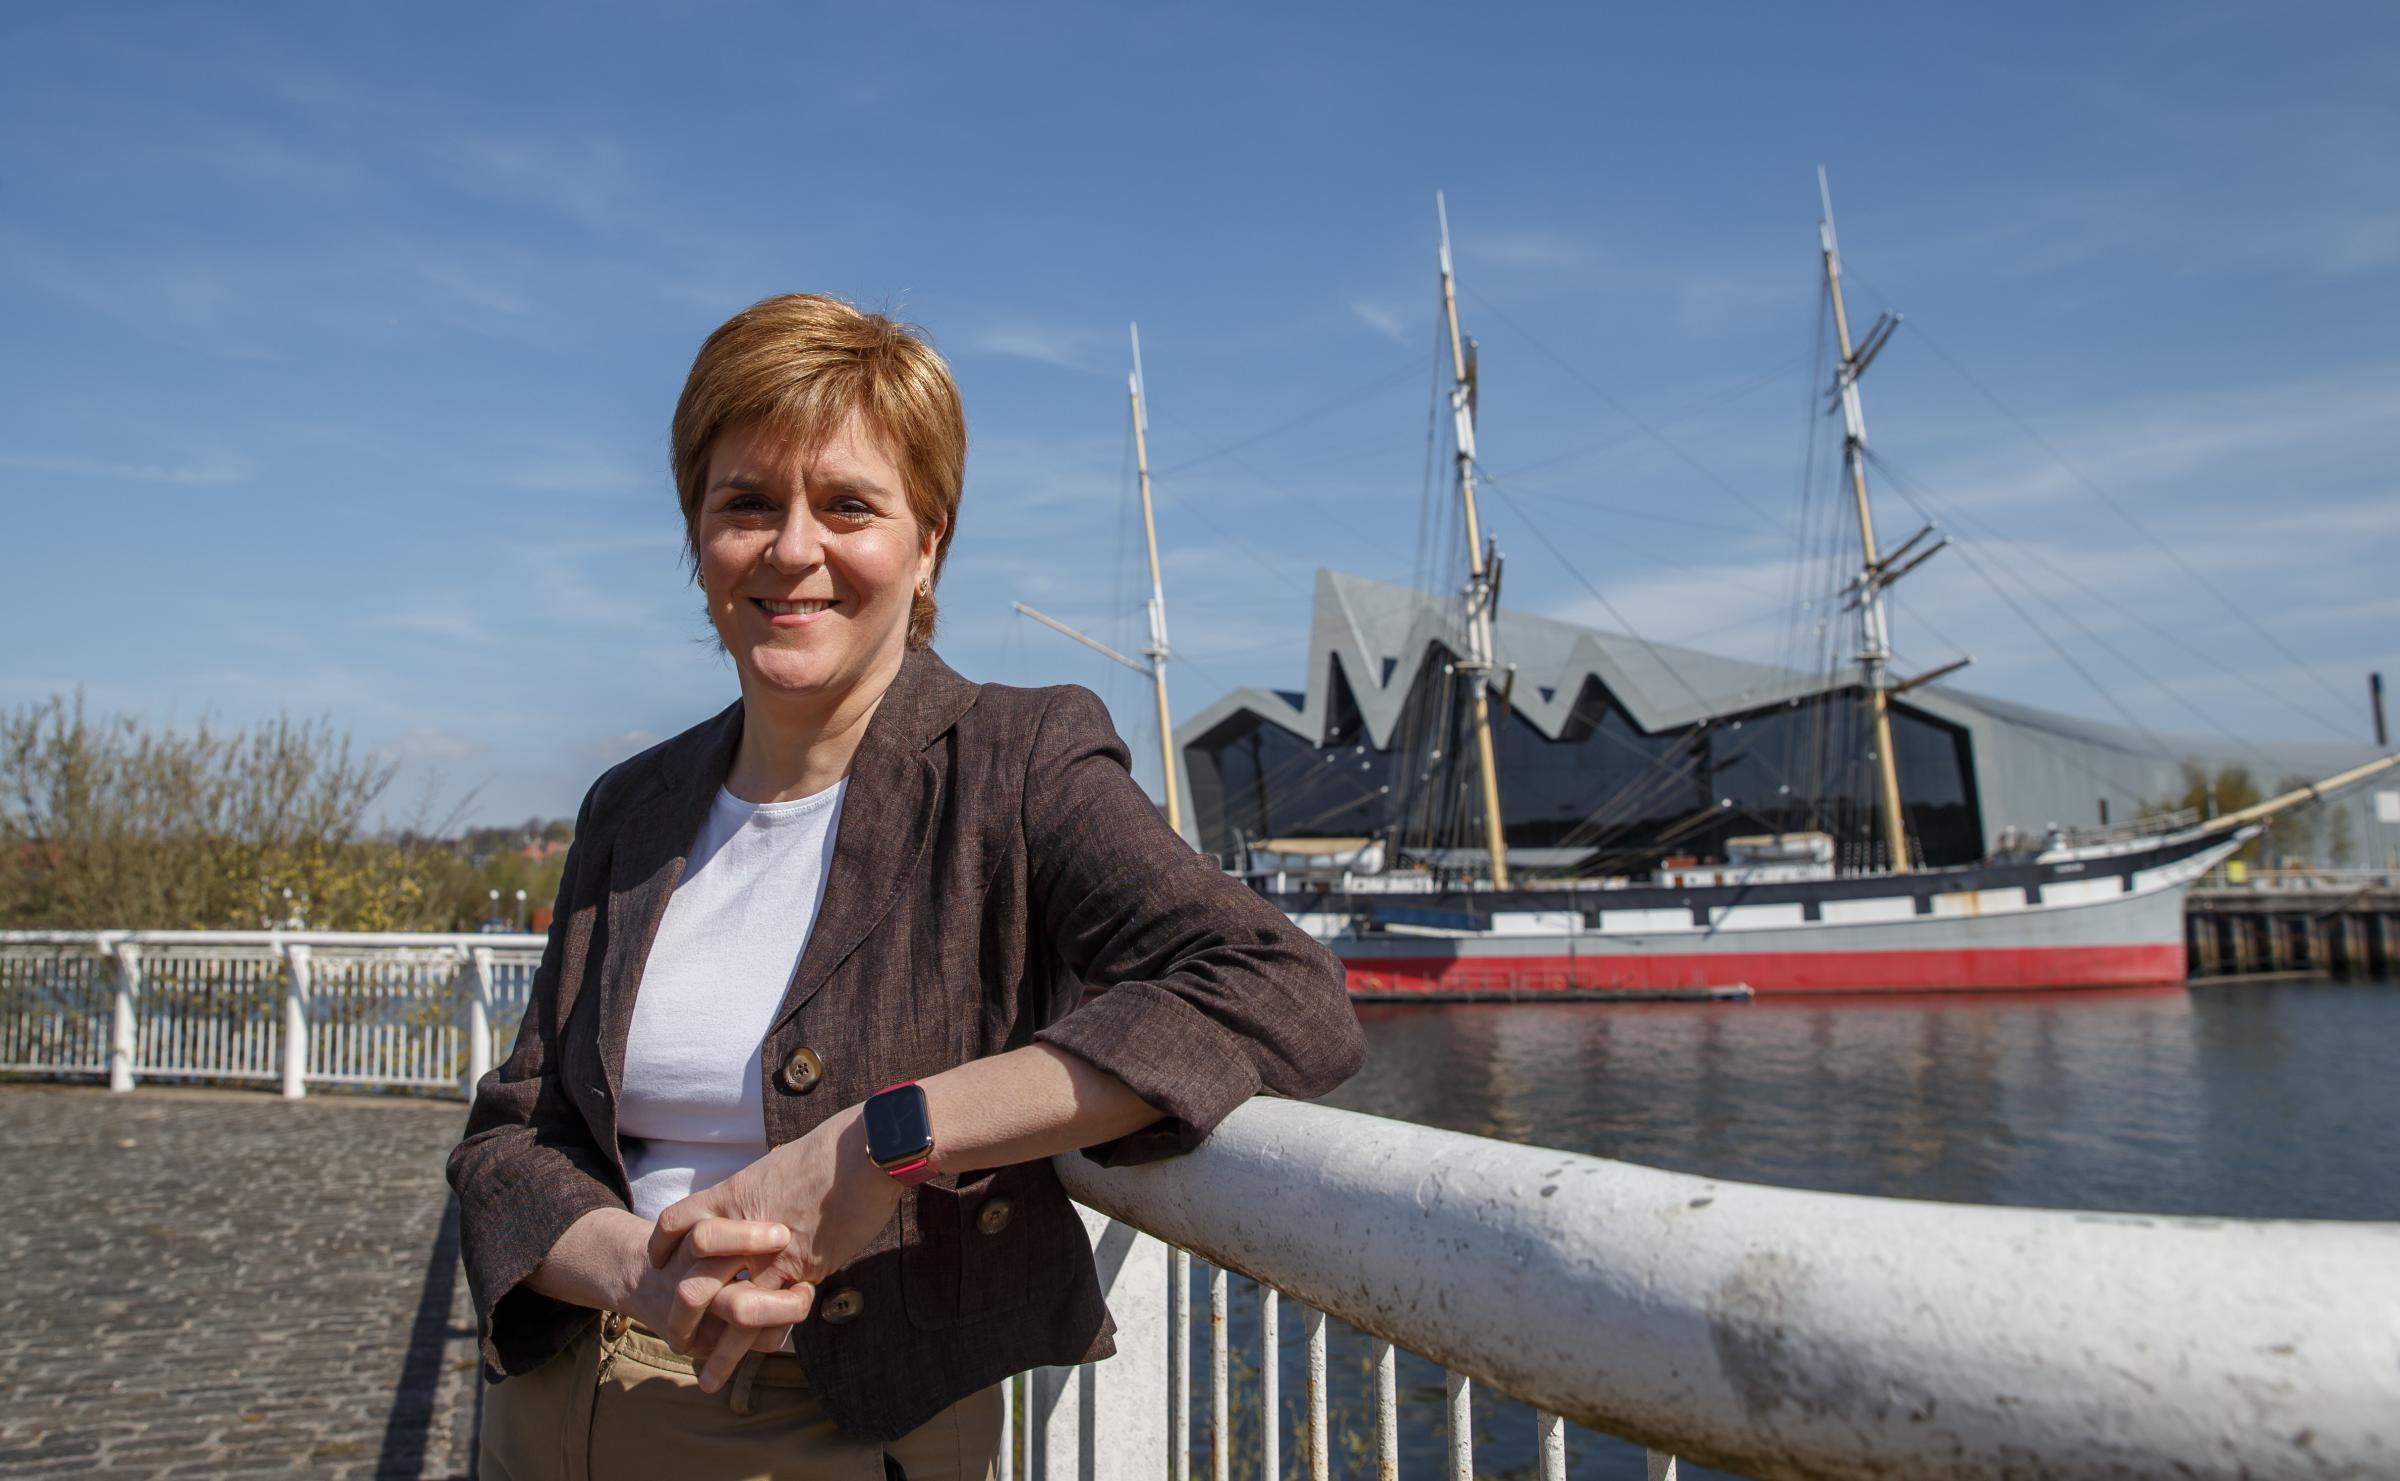 Nicola Sturgeon becomes Scotland's longest serving First Minister